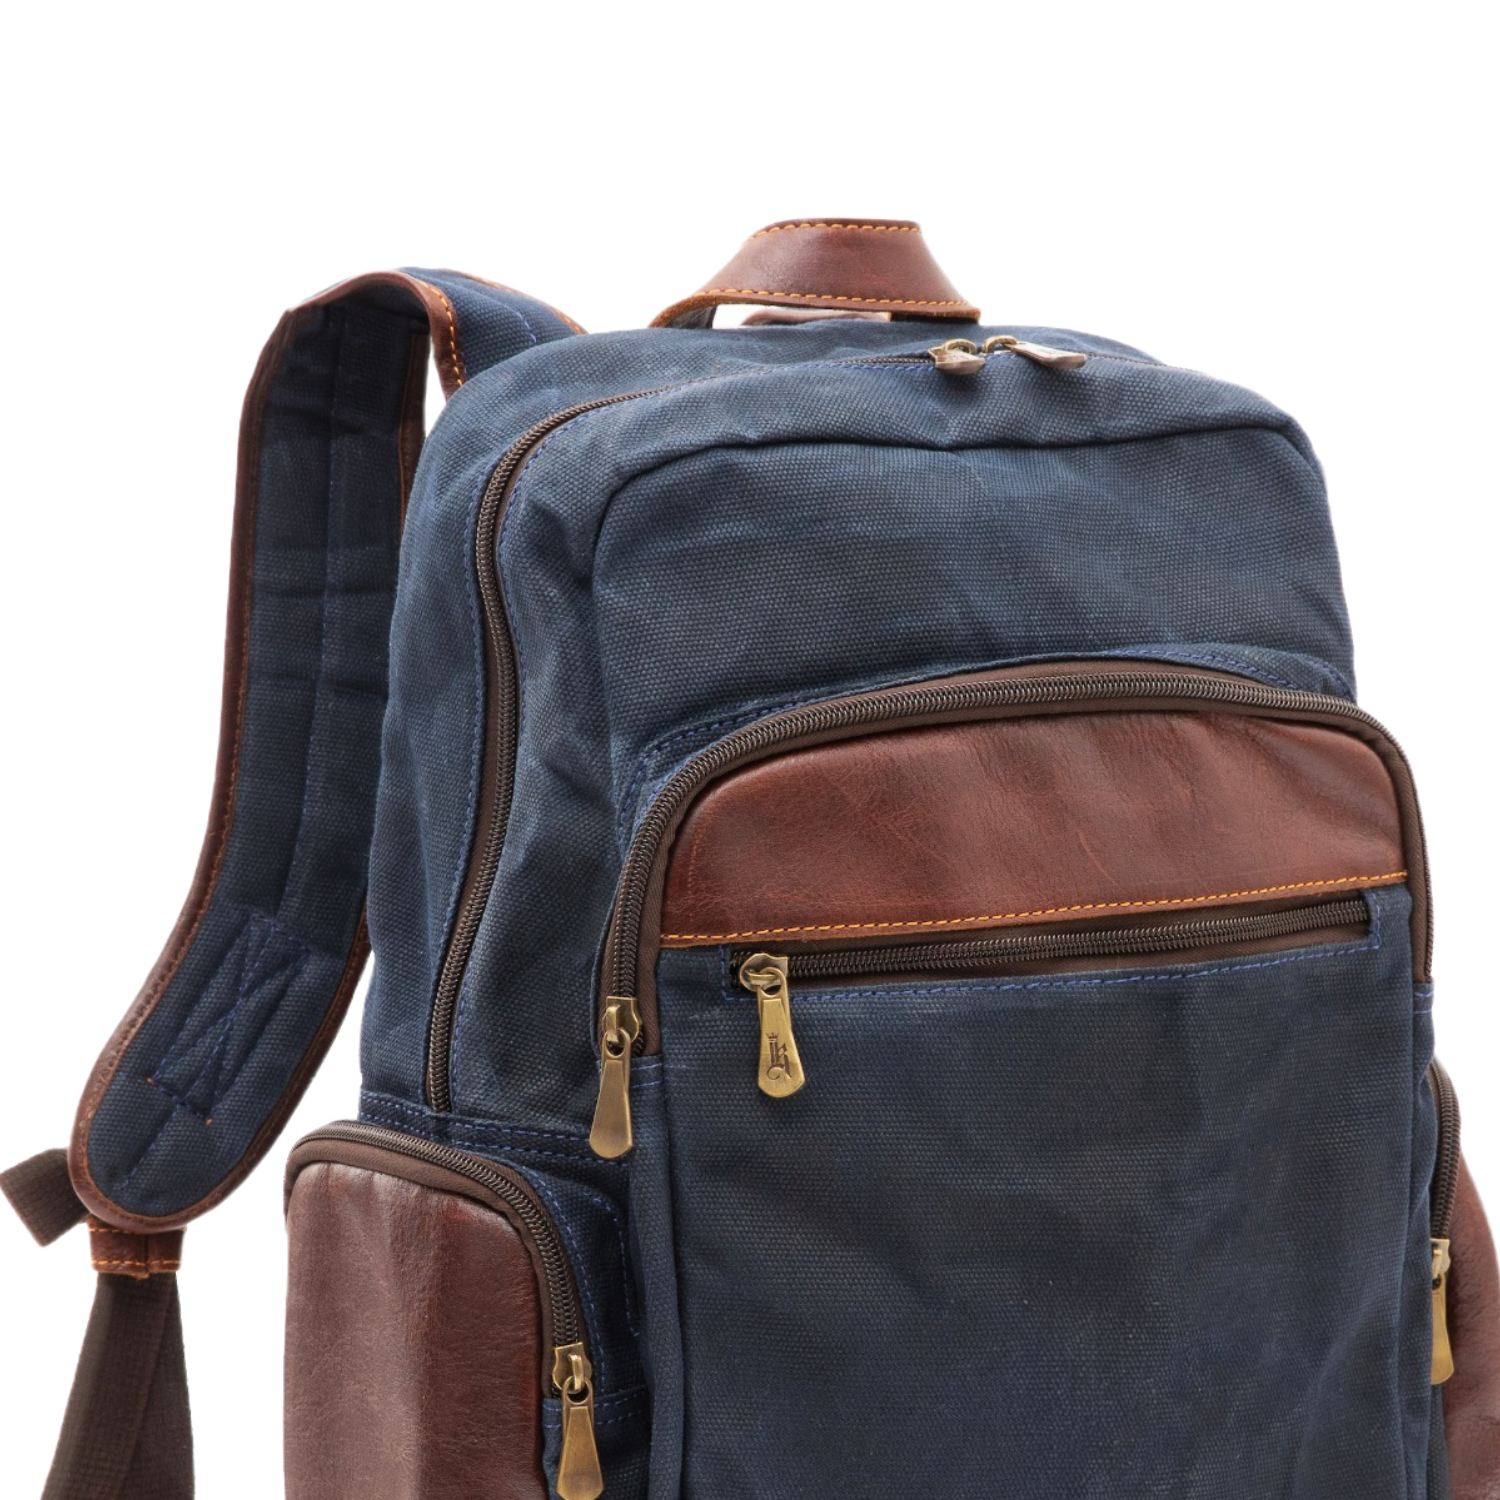 Waxed Canvas Backpack – Winter Session